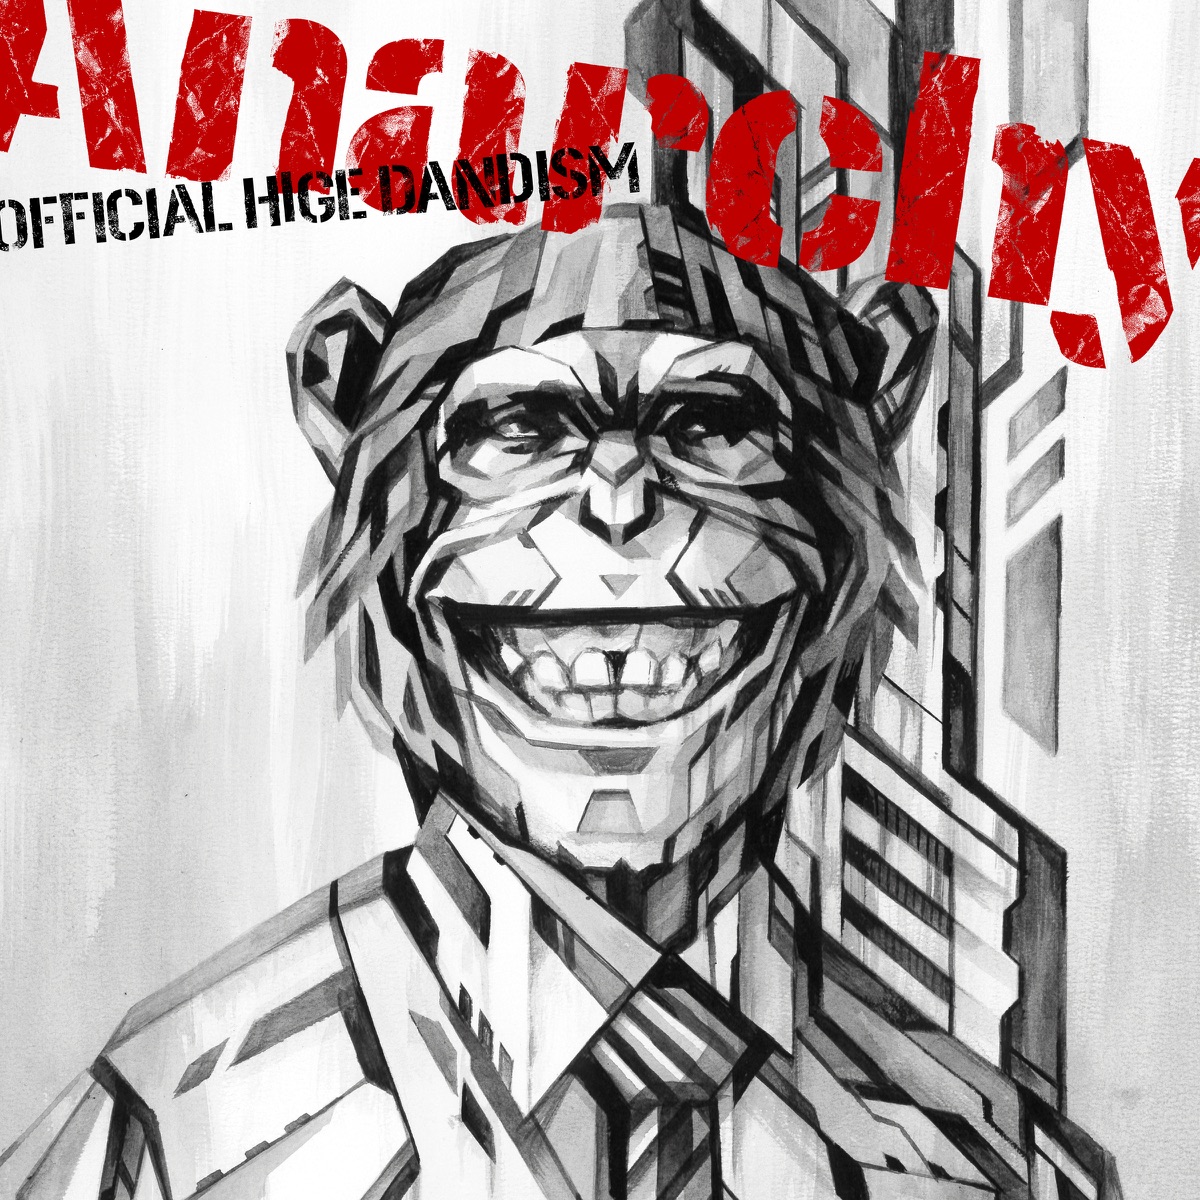 Cover art for『Official HIGE DANdism - Anarchy』from the release『Anarchy』